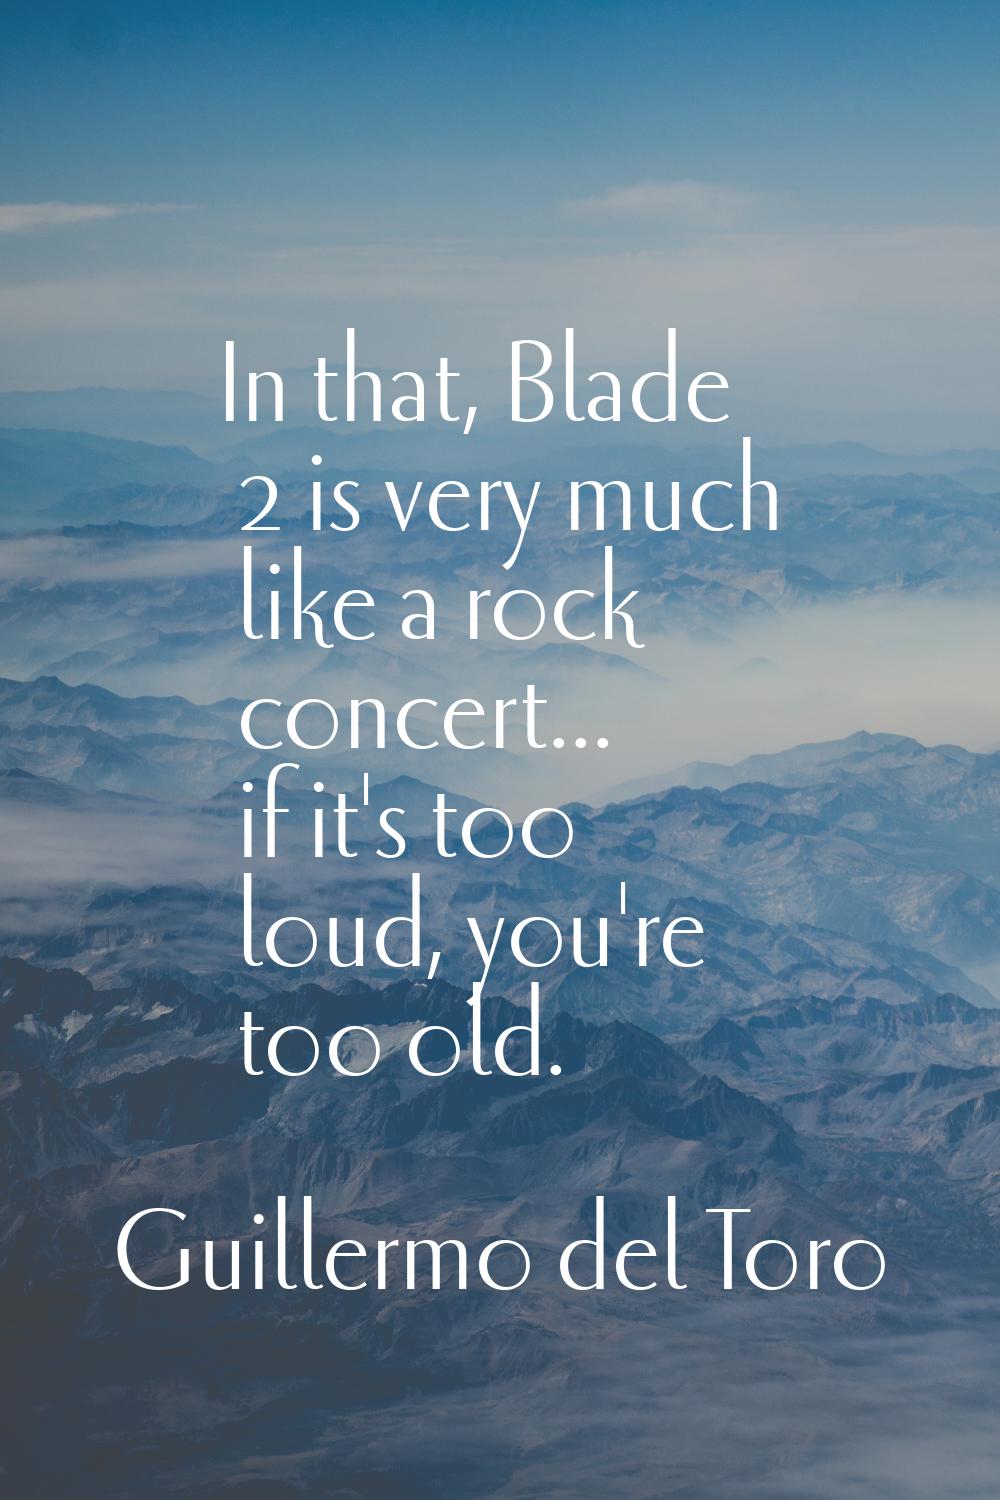 In that, Blade 2 is very much like a rock concert... if it's too loud, you're too old.